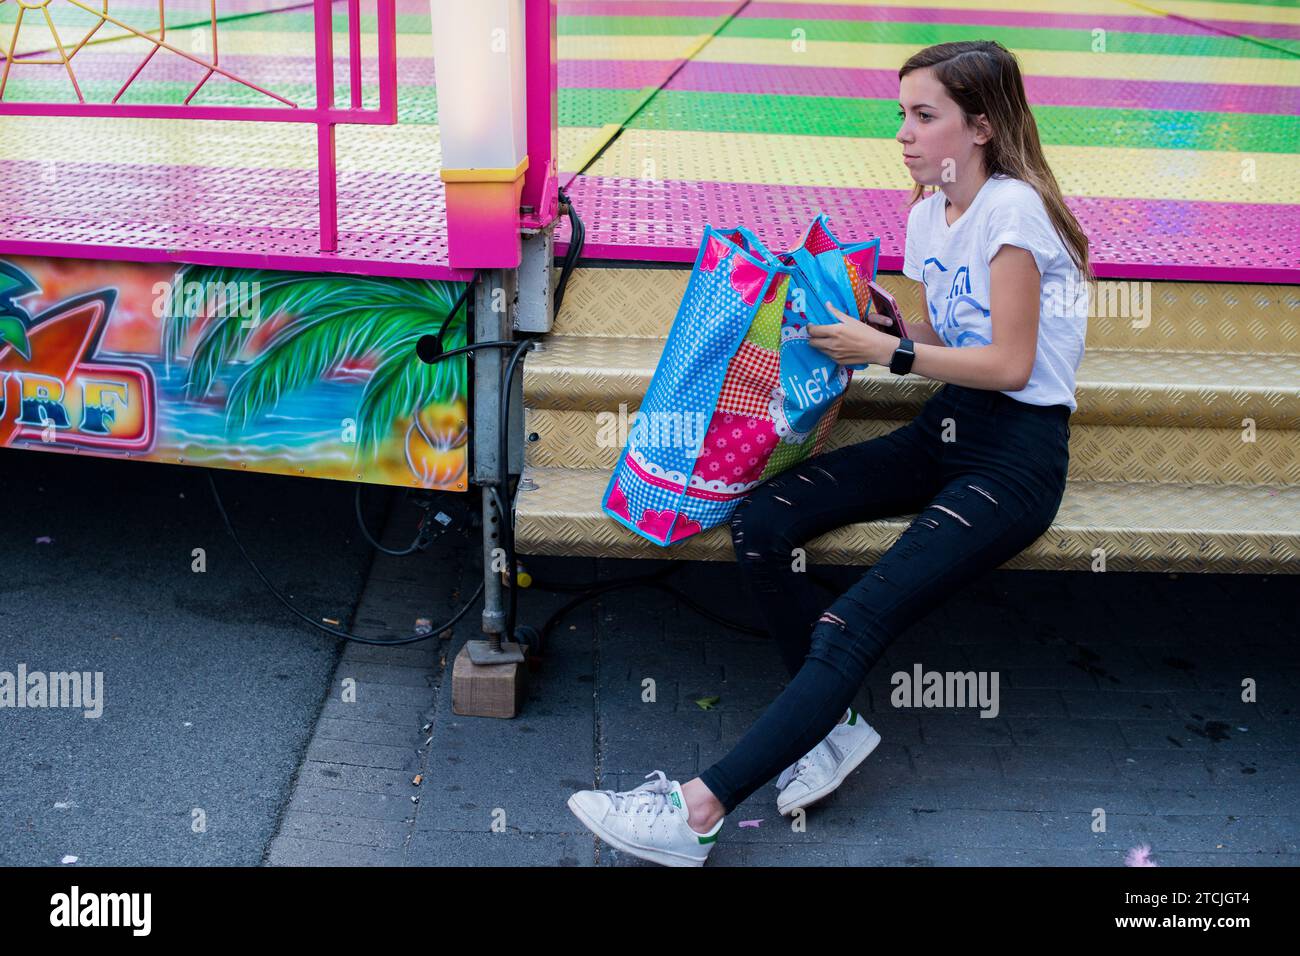 Tilburg, Netherlands. Teenage girl waiting at a annual fair's attraction just before opening. Stock Photo